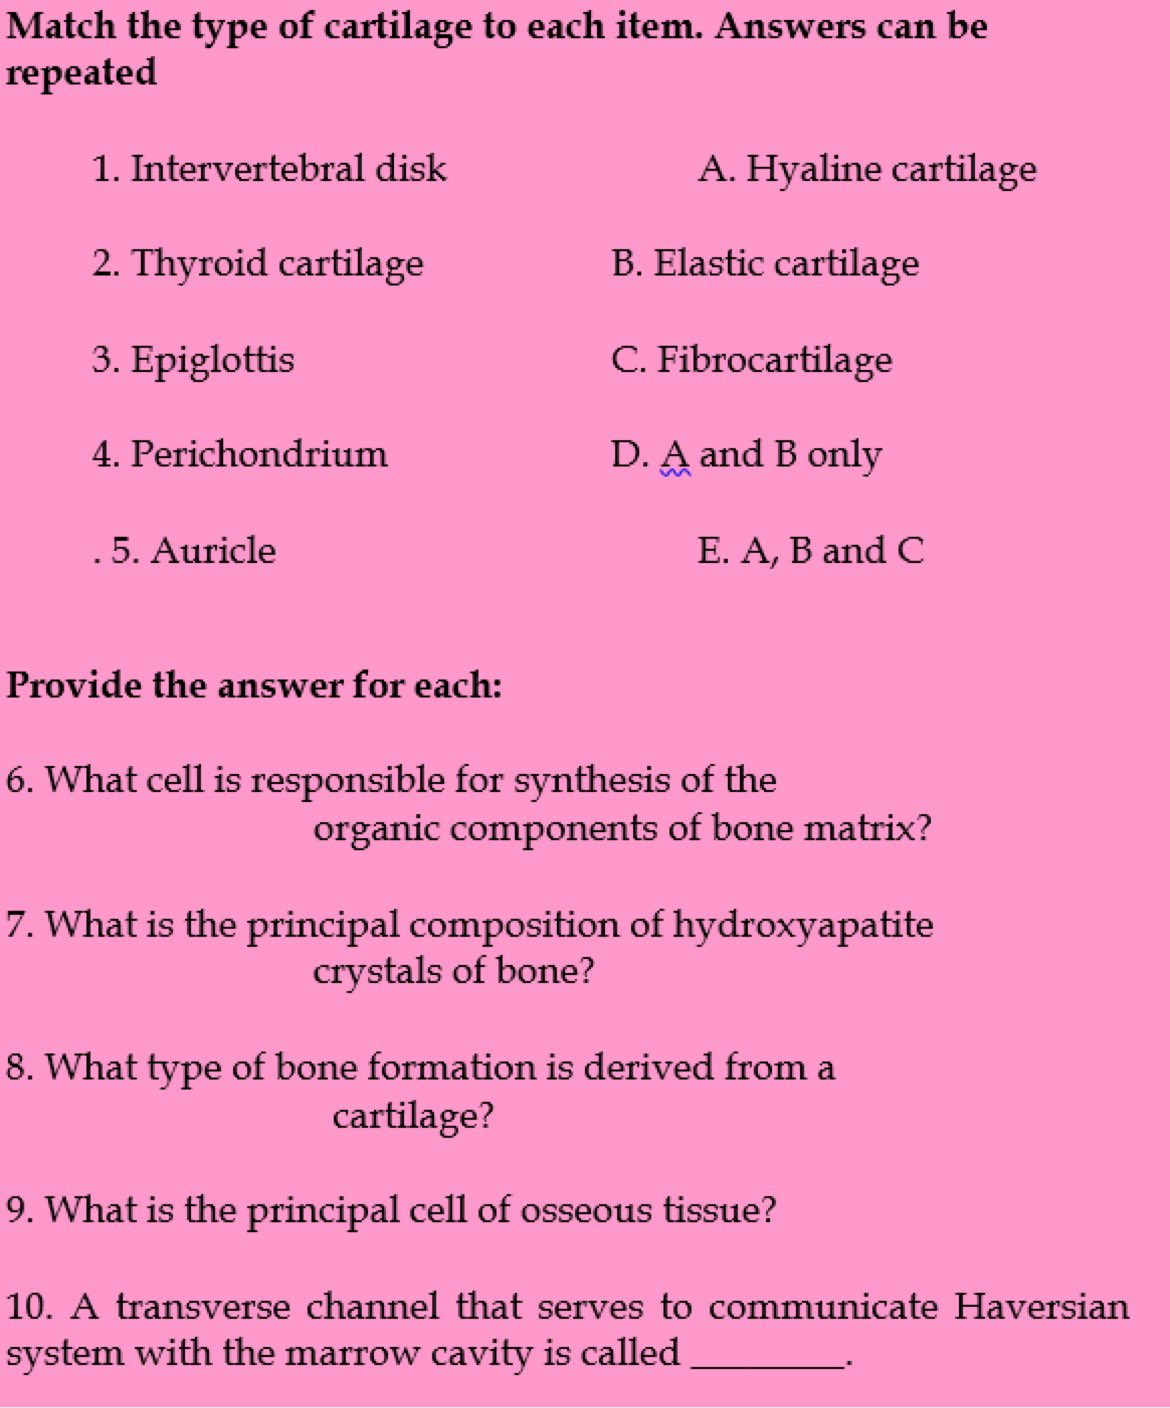 Match the type of cartilage to each item. Answers can be
repeated
1. Intervertebral disk
A. Hyaline cartilage
2. Thyroid cartilage
B. Elastic cartilage
3. Epiglottis
C. Fibrocartilage
4. Perichondrium
D. A and B only
.5. Auricle
E. A, B and C
Provide the answer for each:
6. What cell is responsible for synthesis of the
organic components of bone matrix?
7. What is the principal composition of hydroxyapatite
crystals of bone?
8. What type of bone formation is derived from a
cartilage?
9. What is the principal cell of osseous tissue?
10. A transverse channel that serves to communicate Haversian
system with the marrow cavity is called
